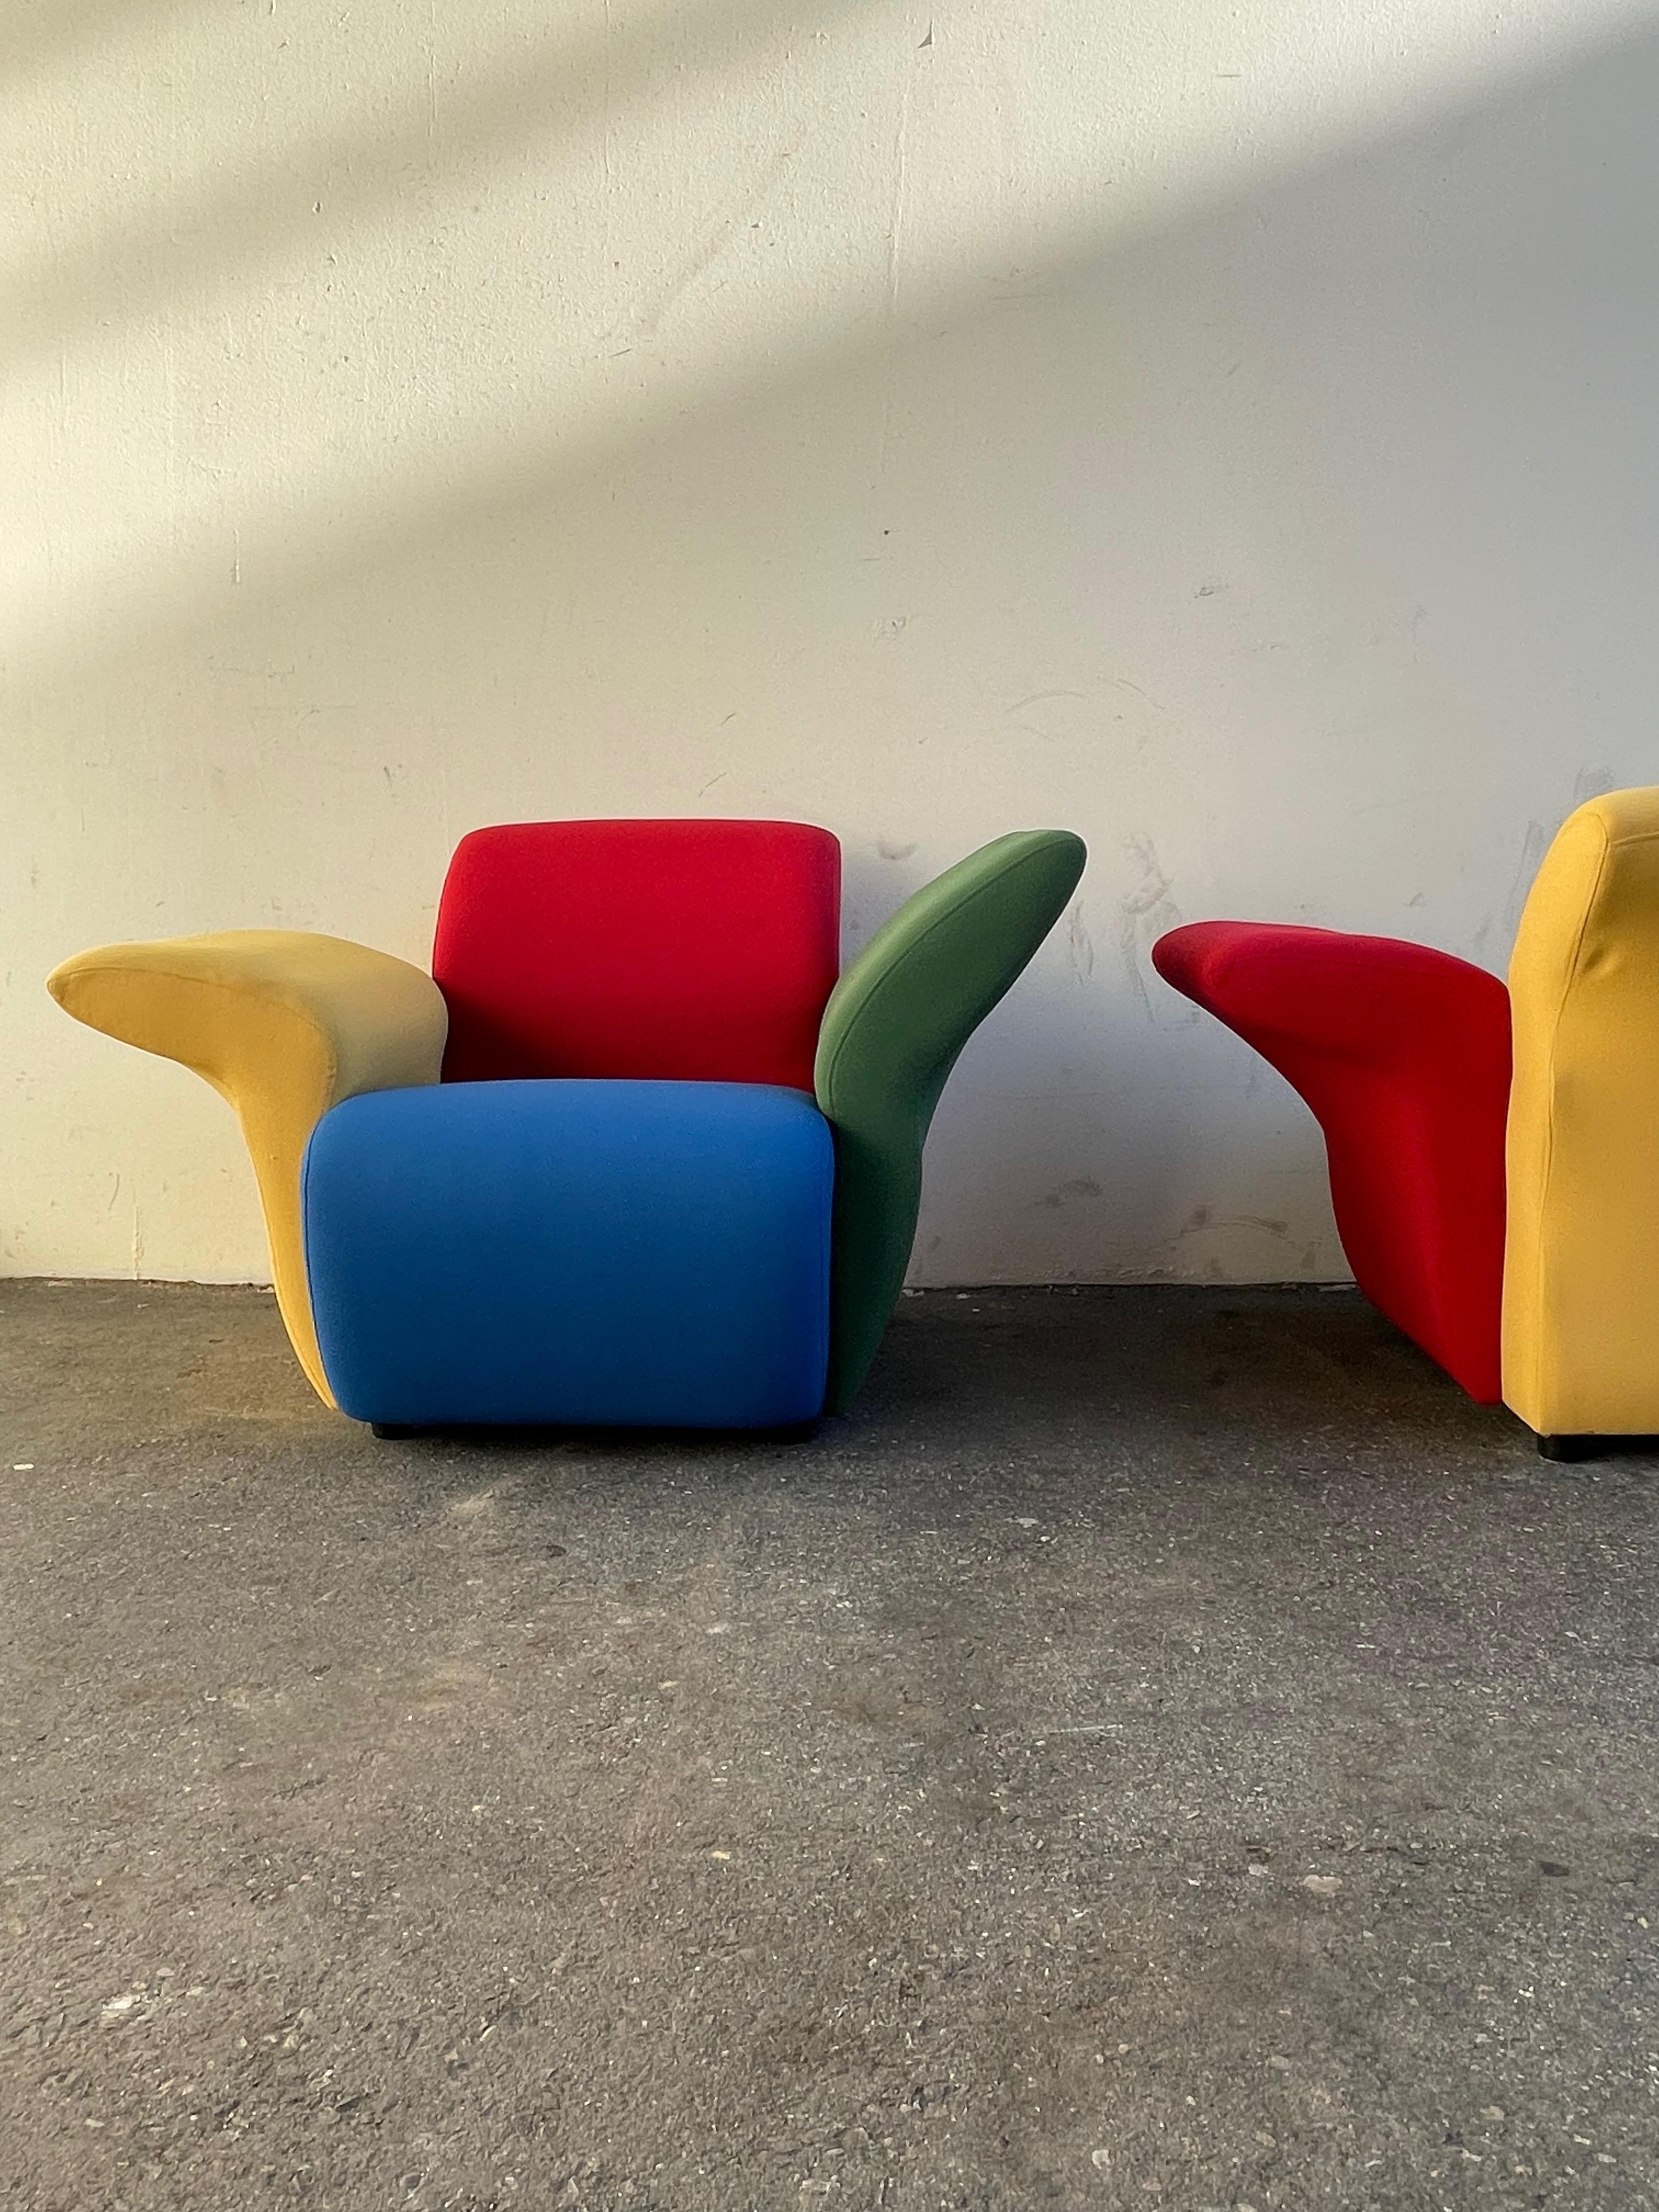 Postmodern Multicolor Lounge Chairs by David Burry, Montreal, 1980s For Sale 5